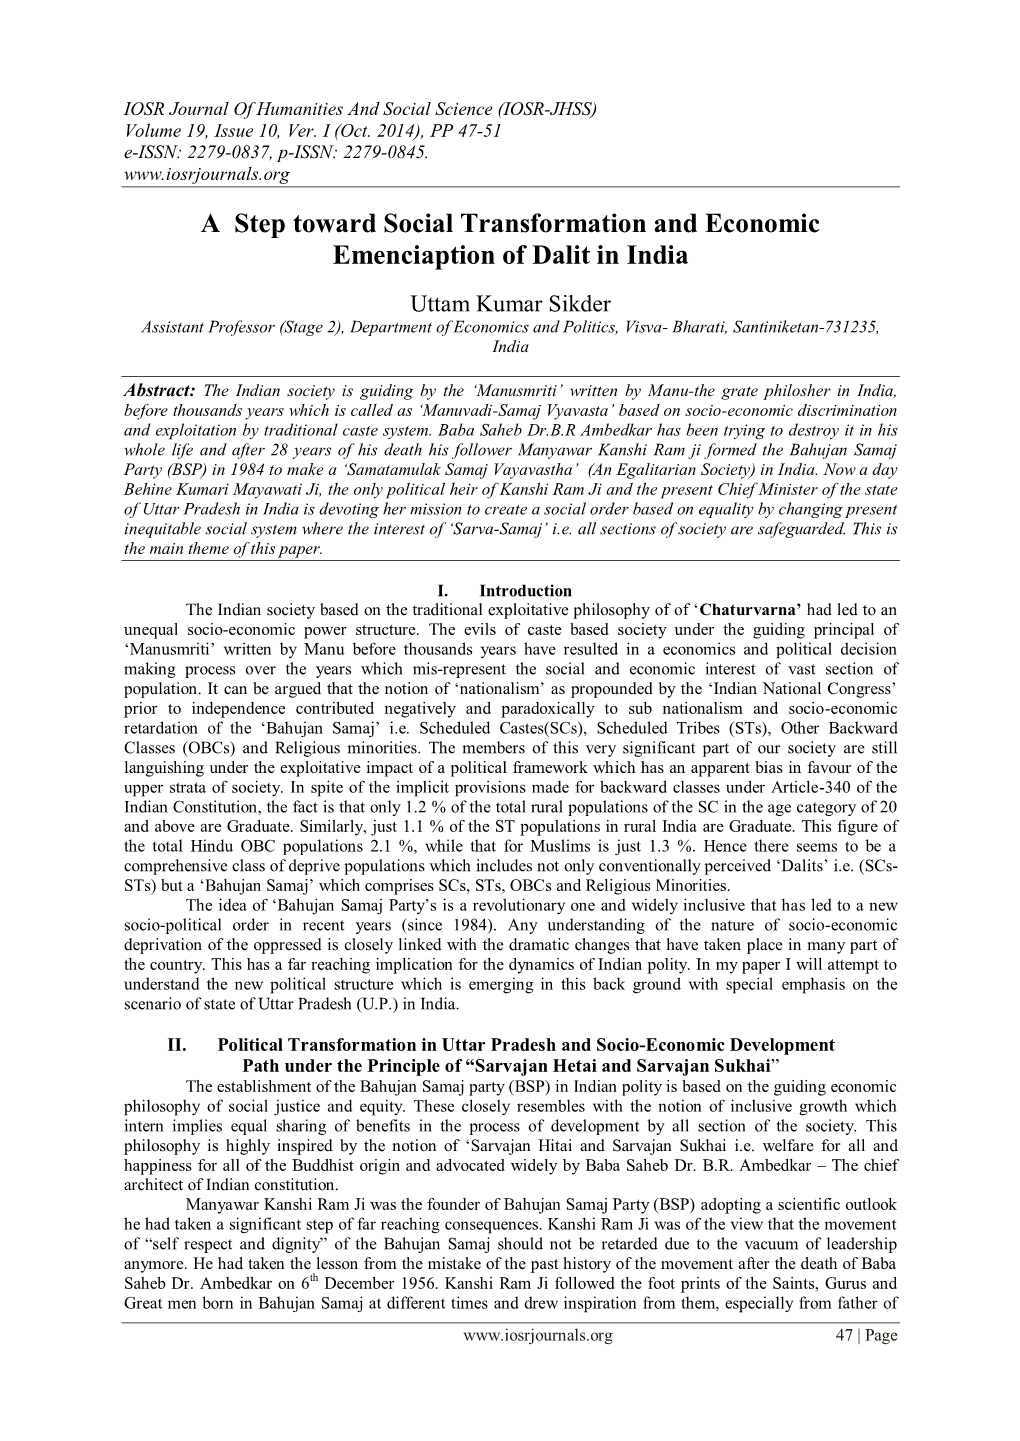 A Step Toward Social Transformation and Economic Emenciaption of Dalit in India